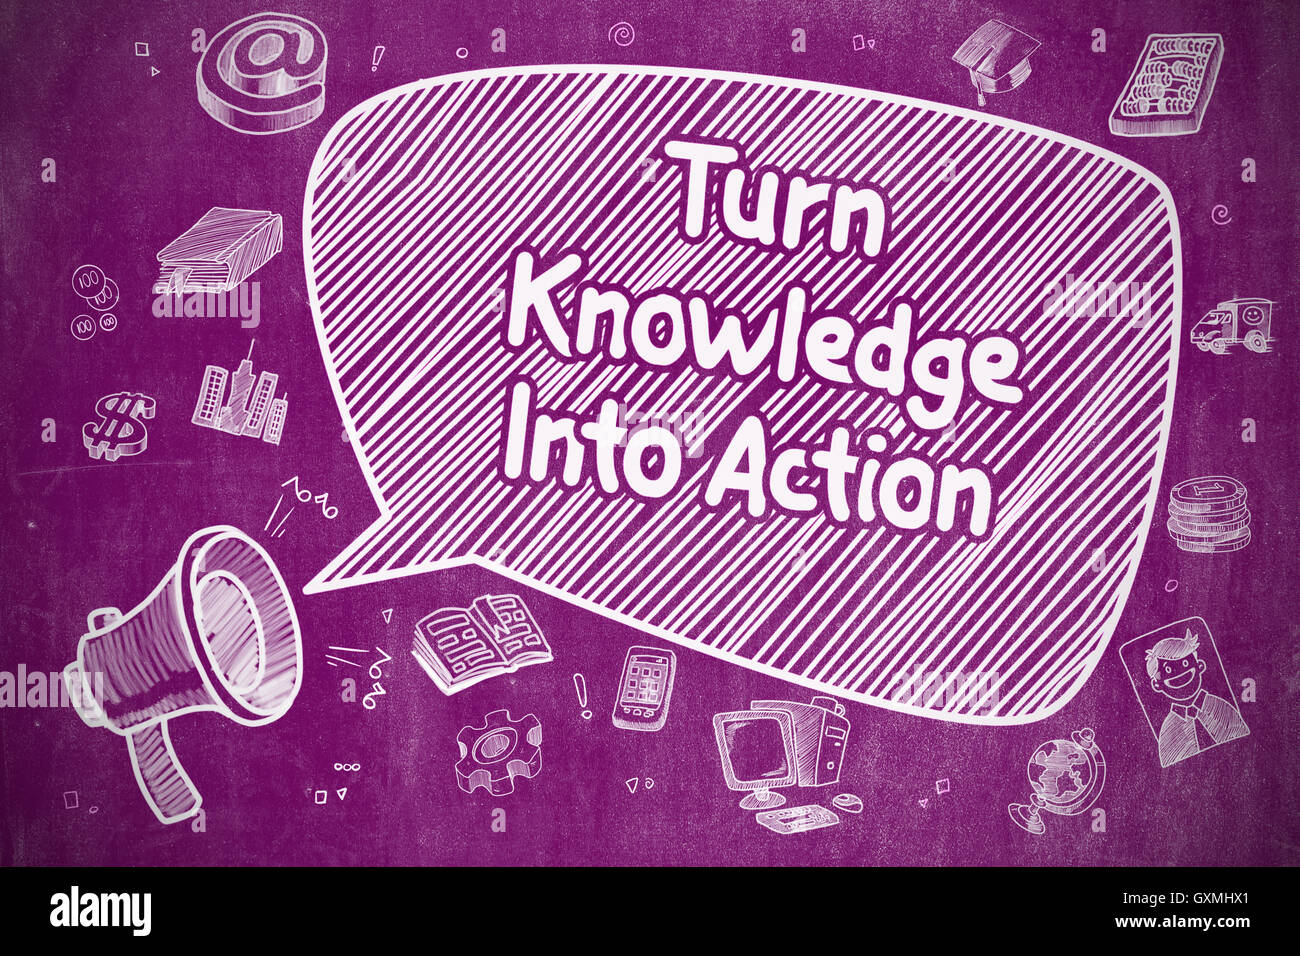 Turn Knowledge Into Action - Business Concept. Stock Photo